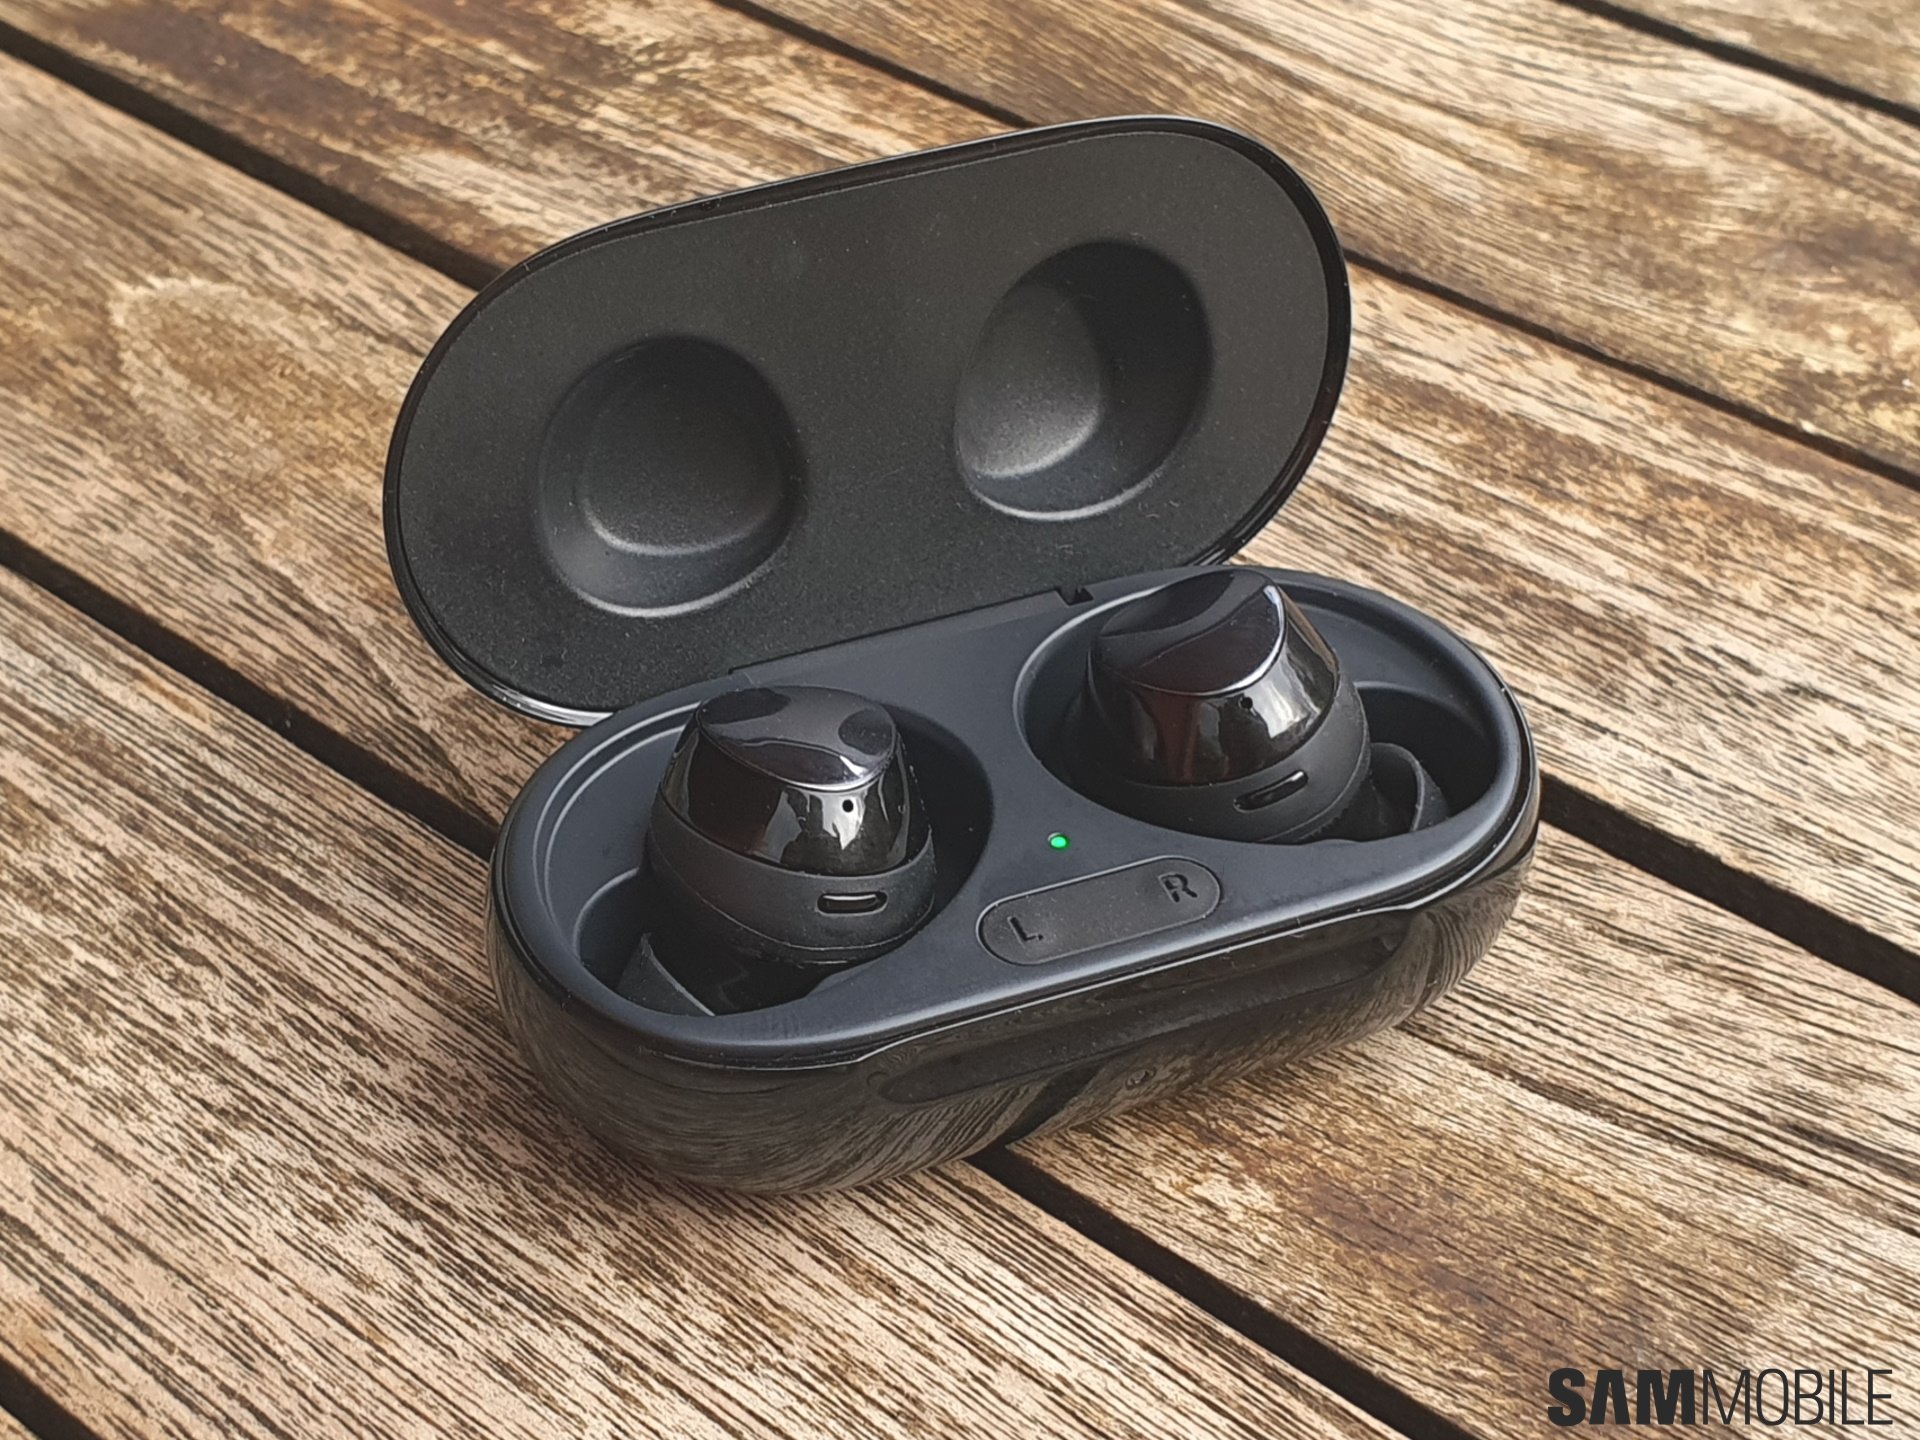 Are 'Buds Beyond' the new earbuds Samsung will launch with Galaxy S21